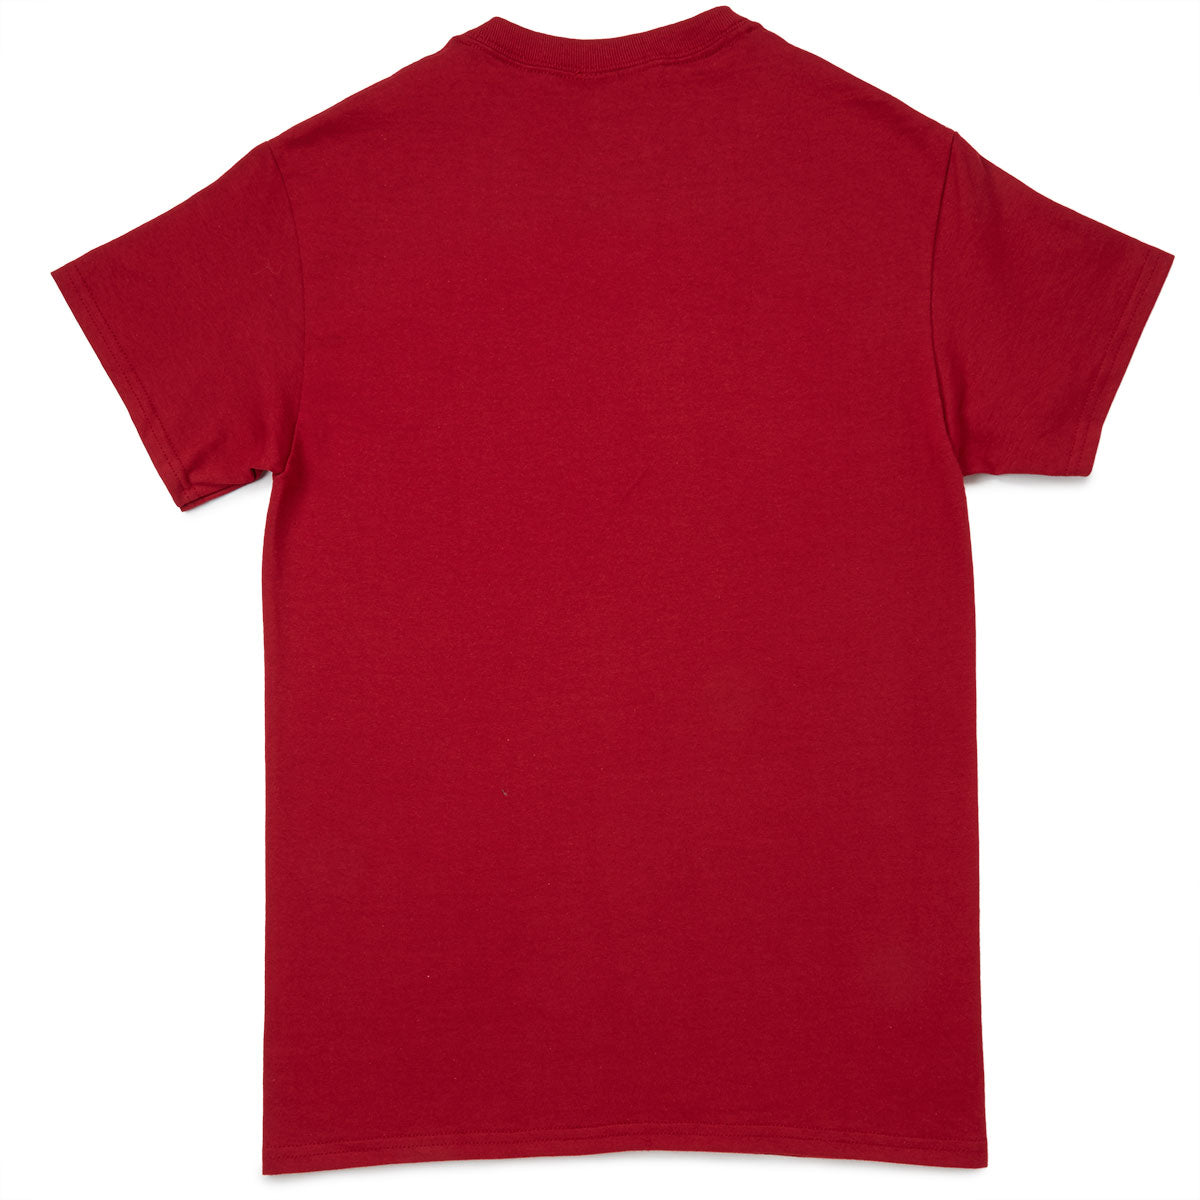 Thrasher Outlined T-Shirt - Cardinal image 2